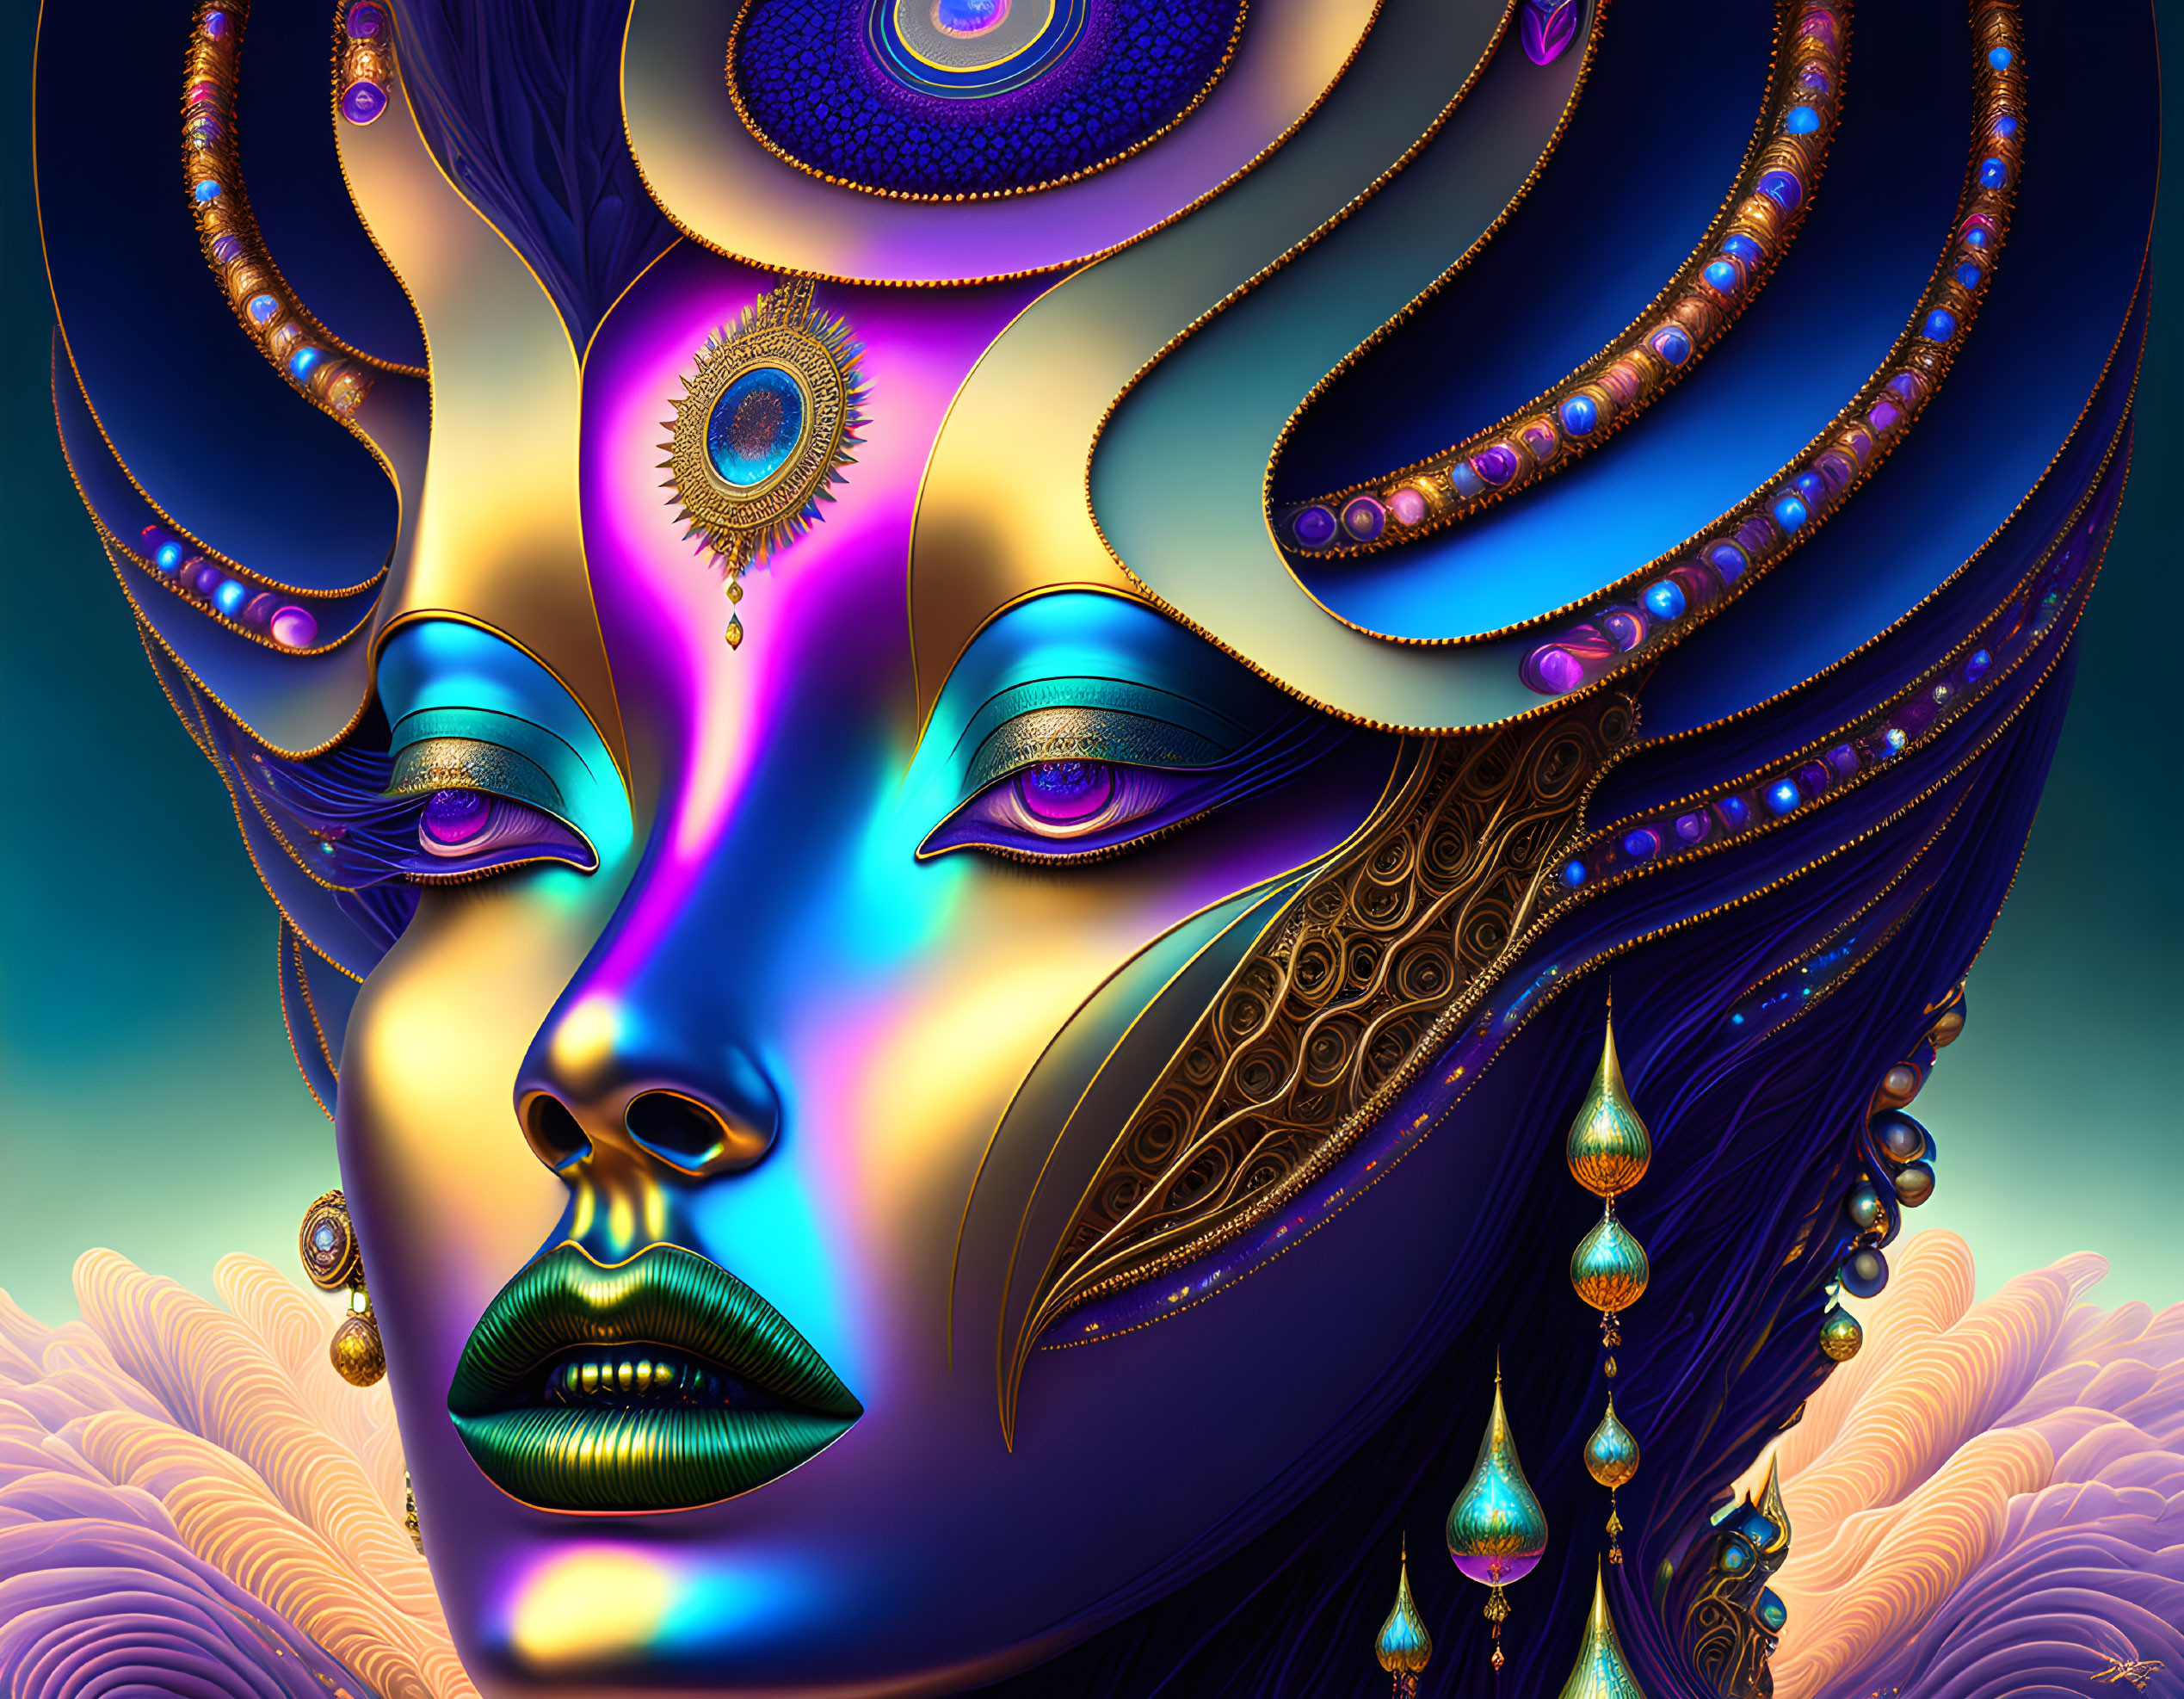 Vibrant neon digital artwork with surreal face and intricate patterns